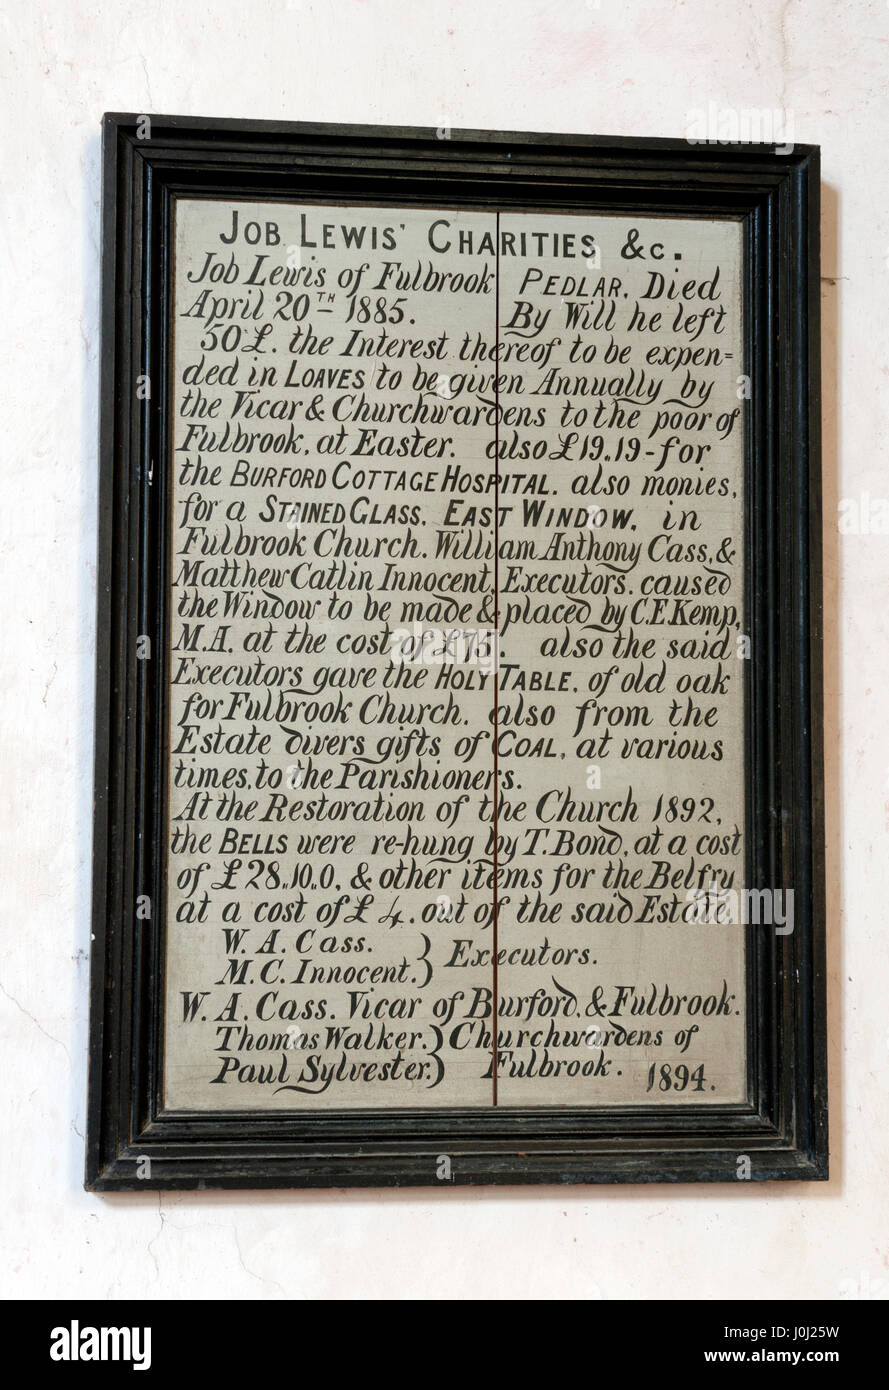 Job Lewis charities board in St. James the Great Church, Fulbrook, Oxfordshire, England, UK Stock Photo